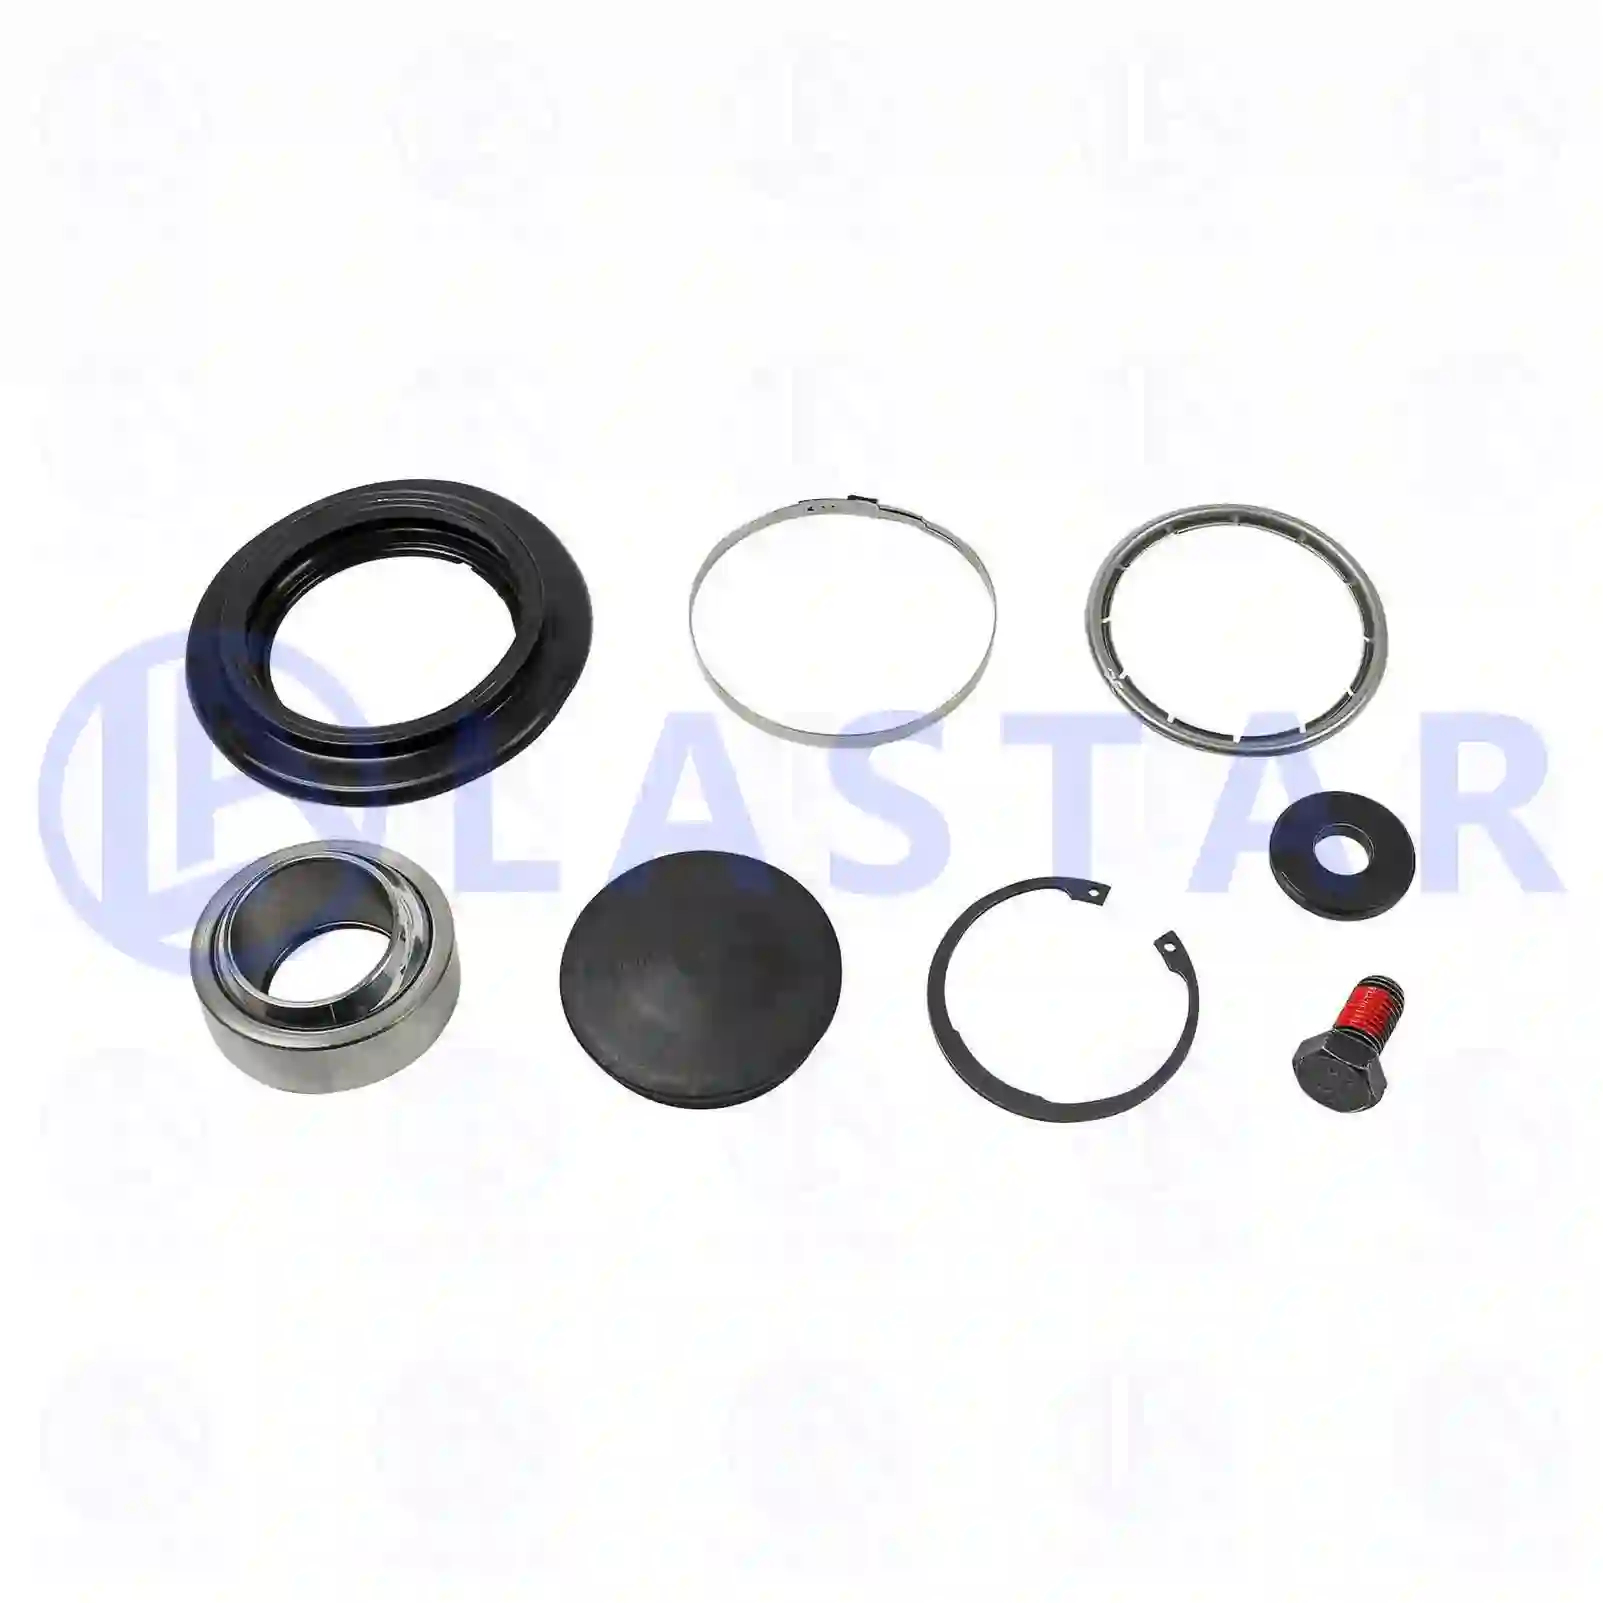 Repair kit, v-stay, 77729000, 20557378 ||  77729000 Lastar Spare Part | Truck Spare Parts, Auotomotive Spare Parts Repair kit, v-stay, 77729000, 20557378 ||  77729000 Lastar Spare Part | Truck Spare Parts, Auotomotive Spare Parts